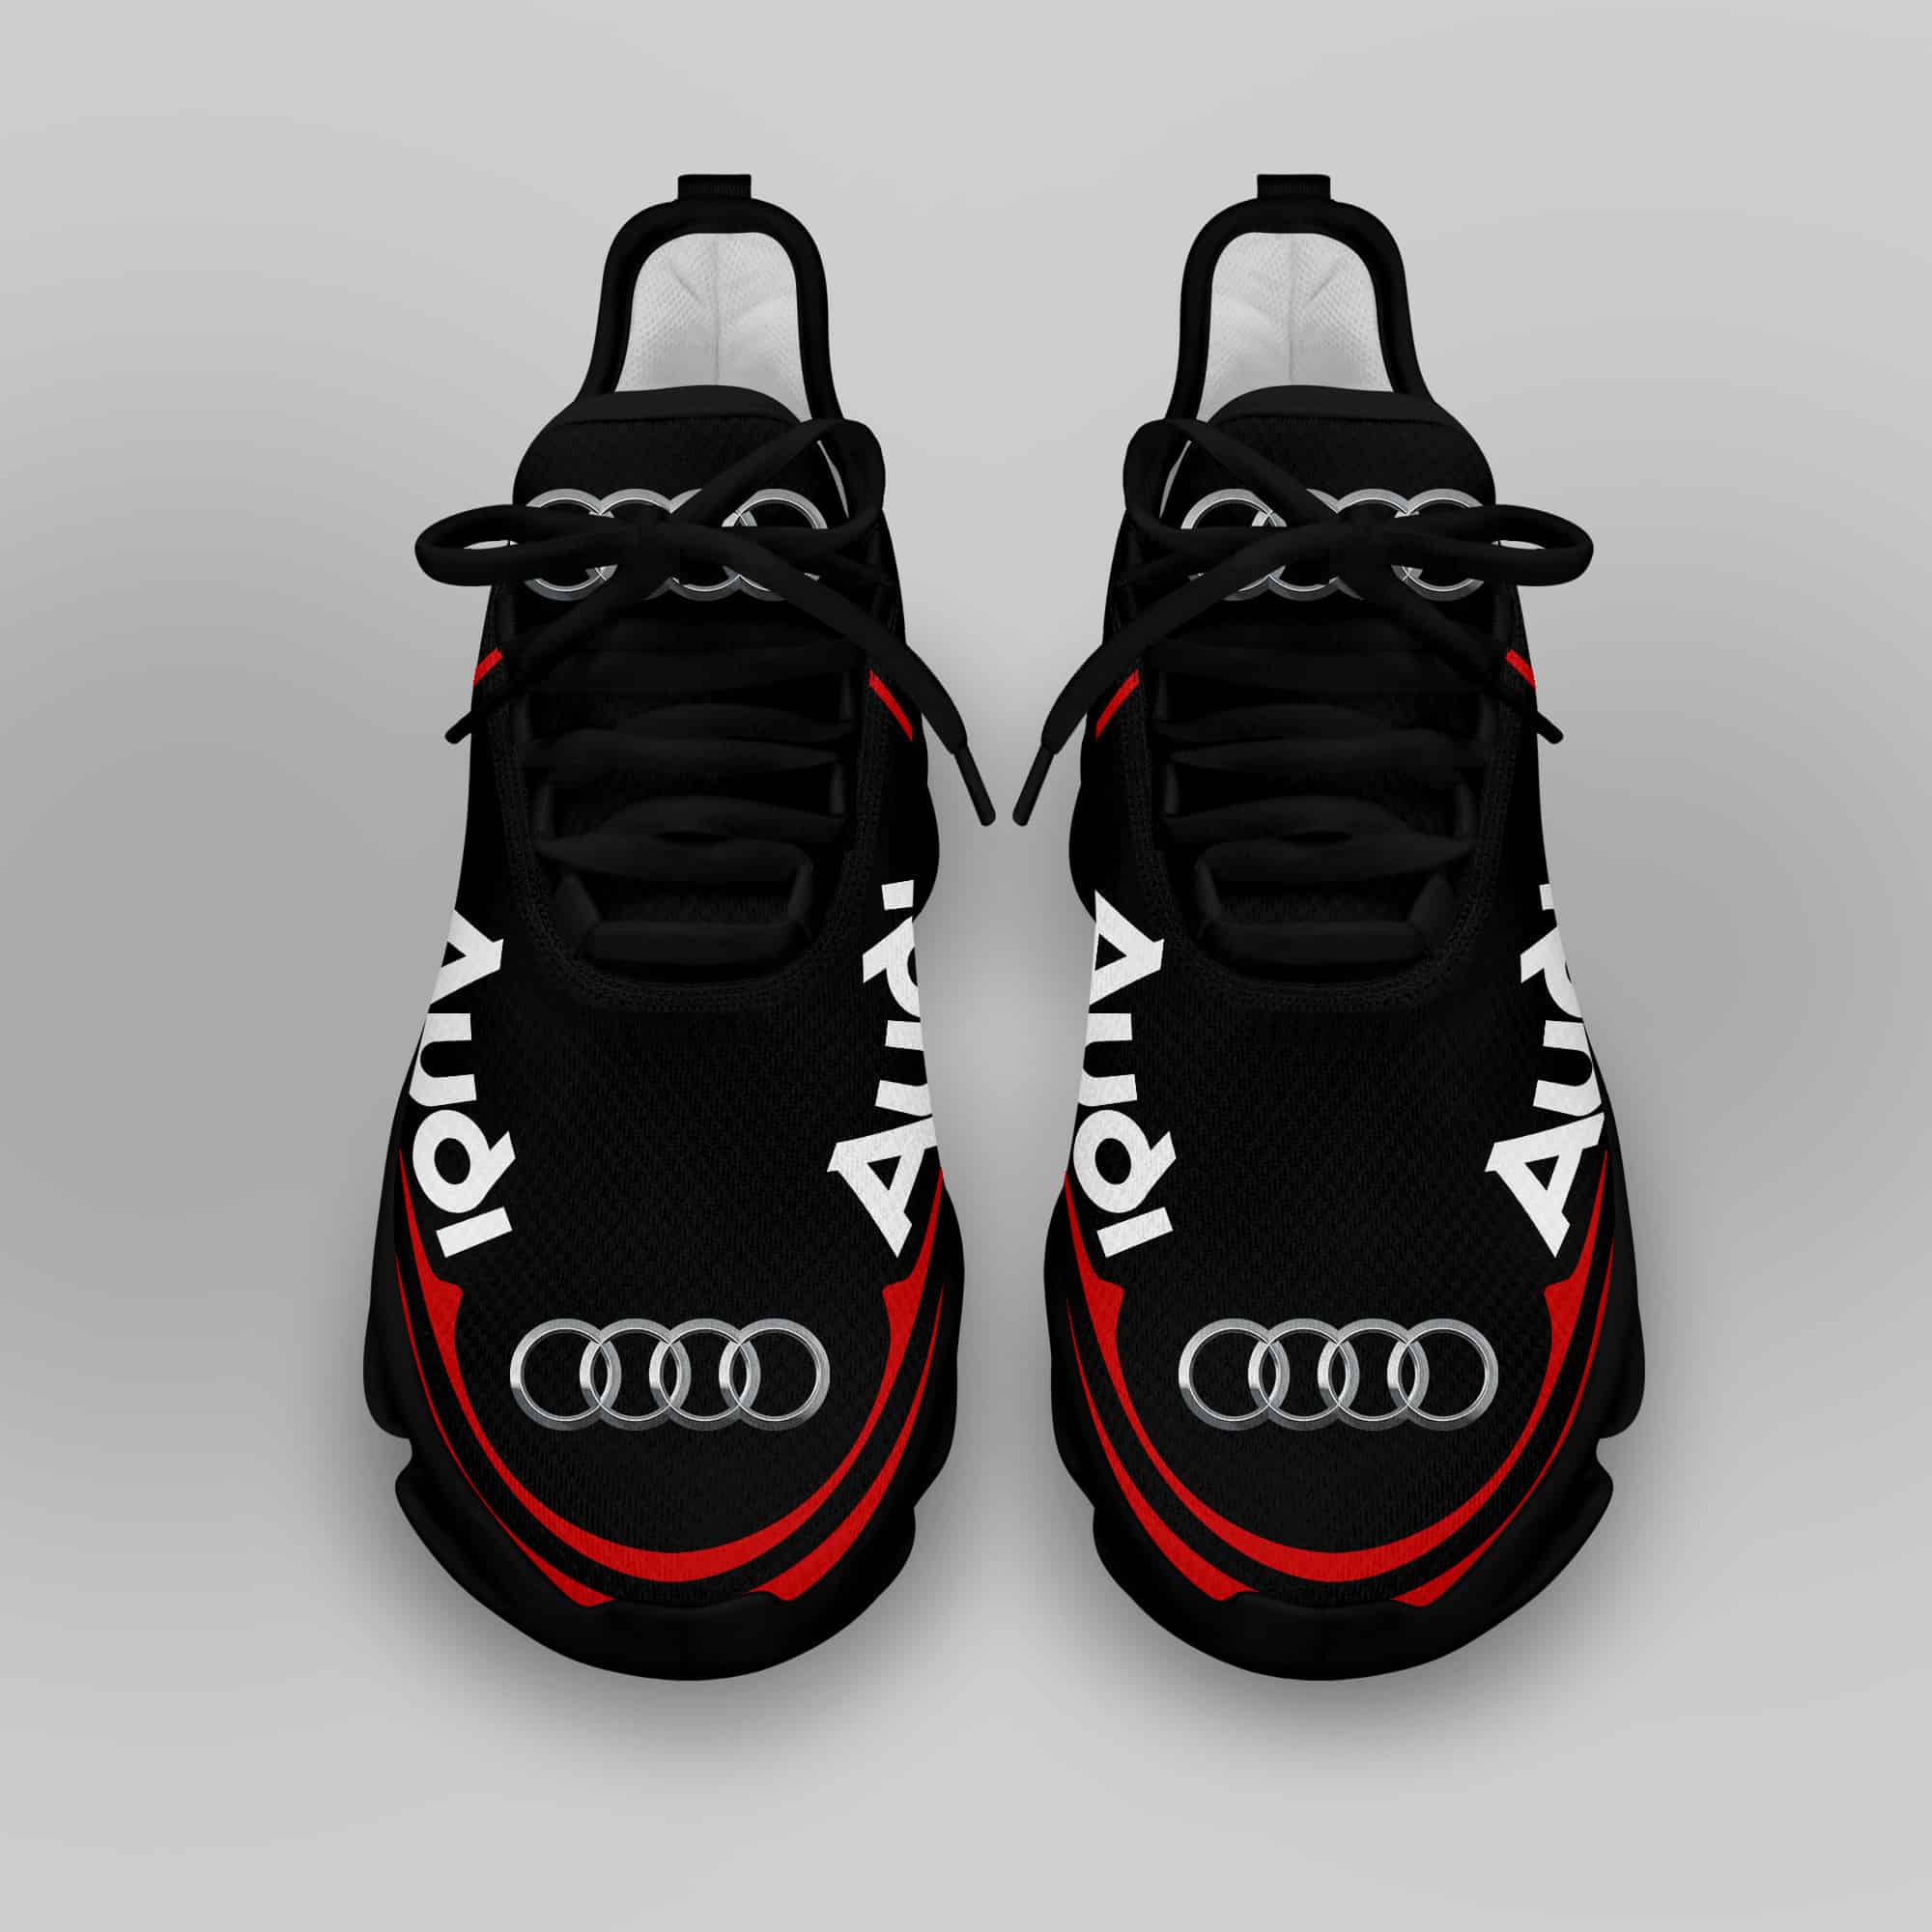 Audi Sport Running Shoes Max Soul Shoes Sneakers Ver 43 4